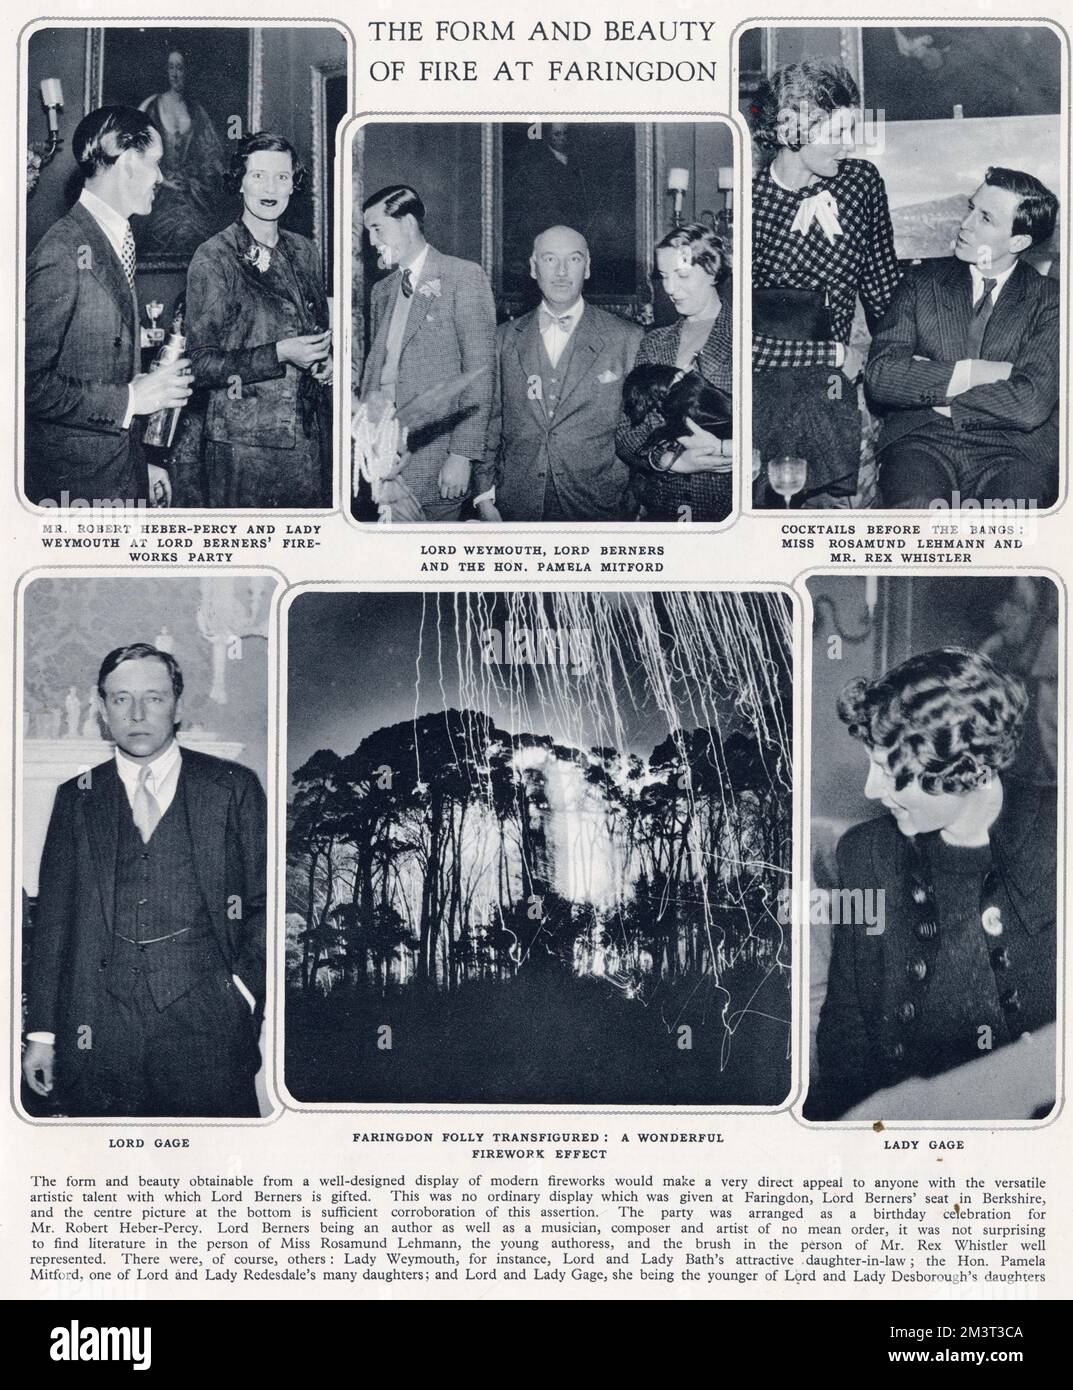 Smart society hosted by Lord Berners to see a firework display set against Faringdon Folly at his seat in Berkshire. Guests include Lord and Lady Gage, Lady Weymouth, Pamela Mitford, Rosamund Lehmann, Rex Whistler and Robert Heber-Percy, in whose honour Lord Berners was holding a birthday party.       Date: 1936 Stock Photo